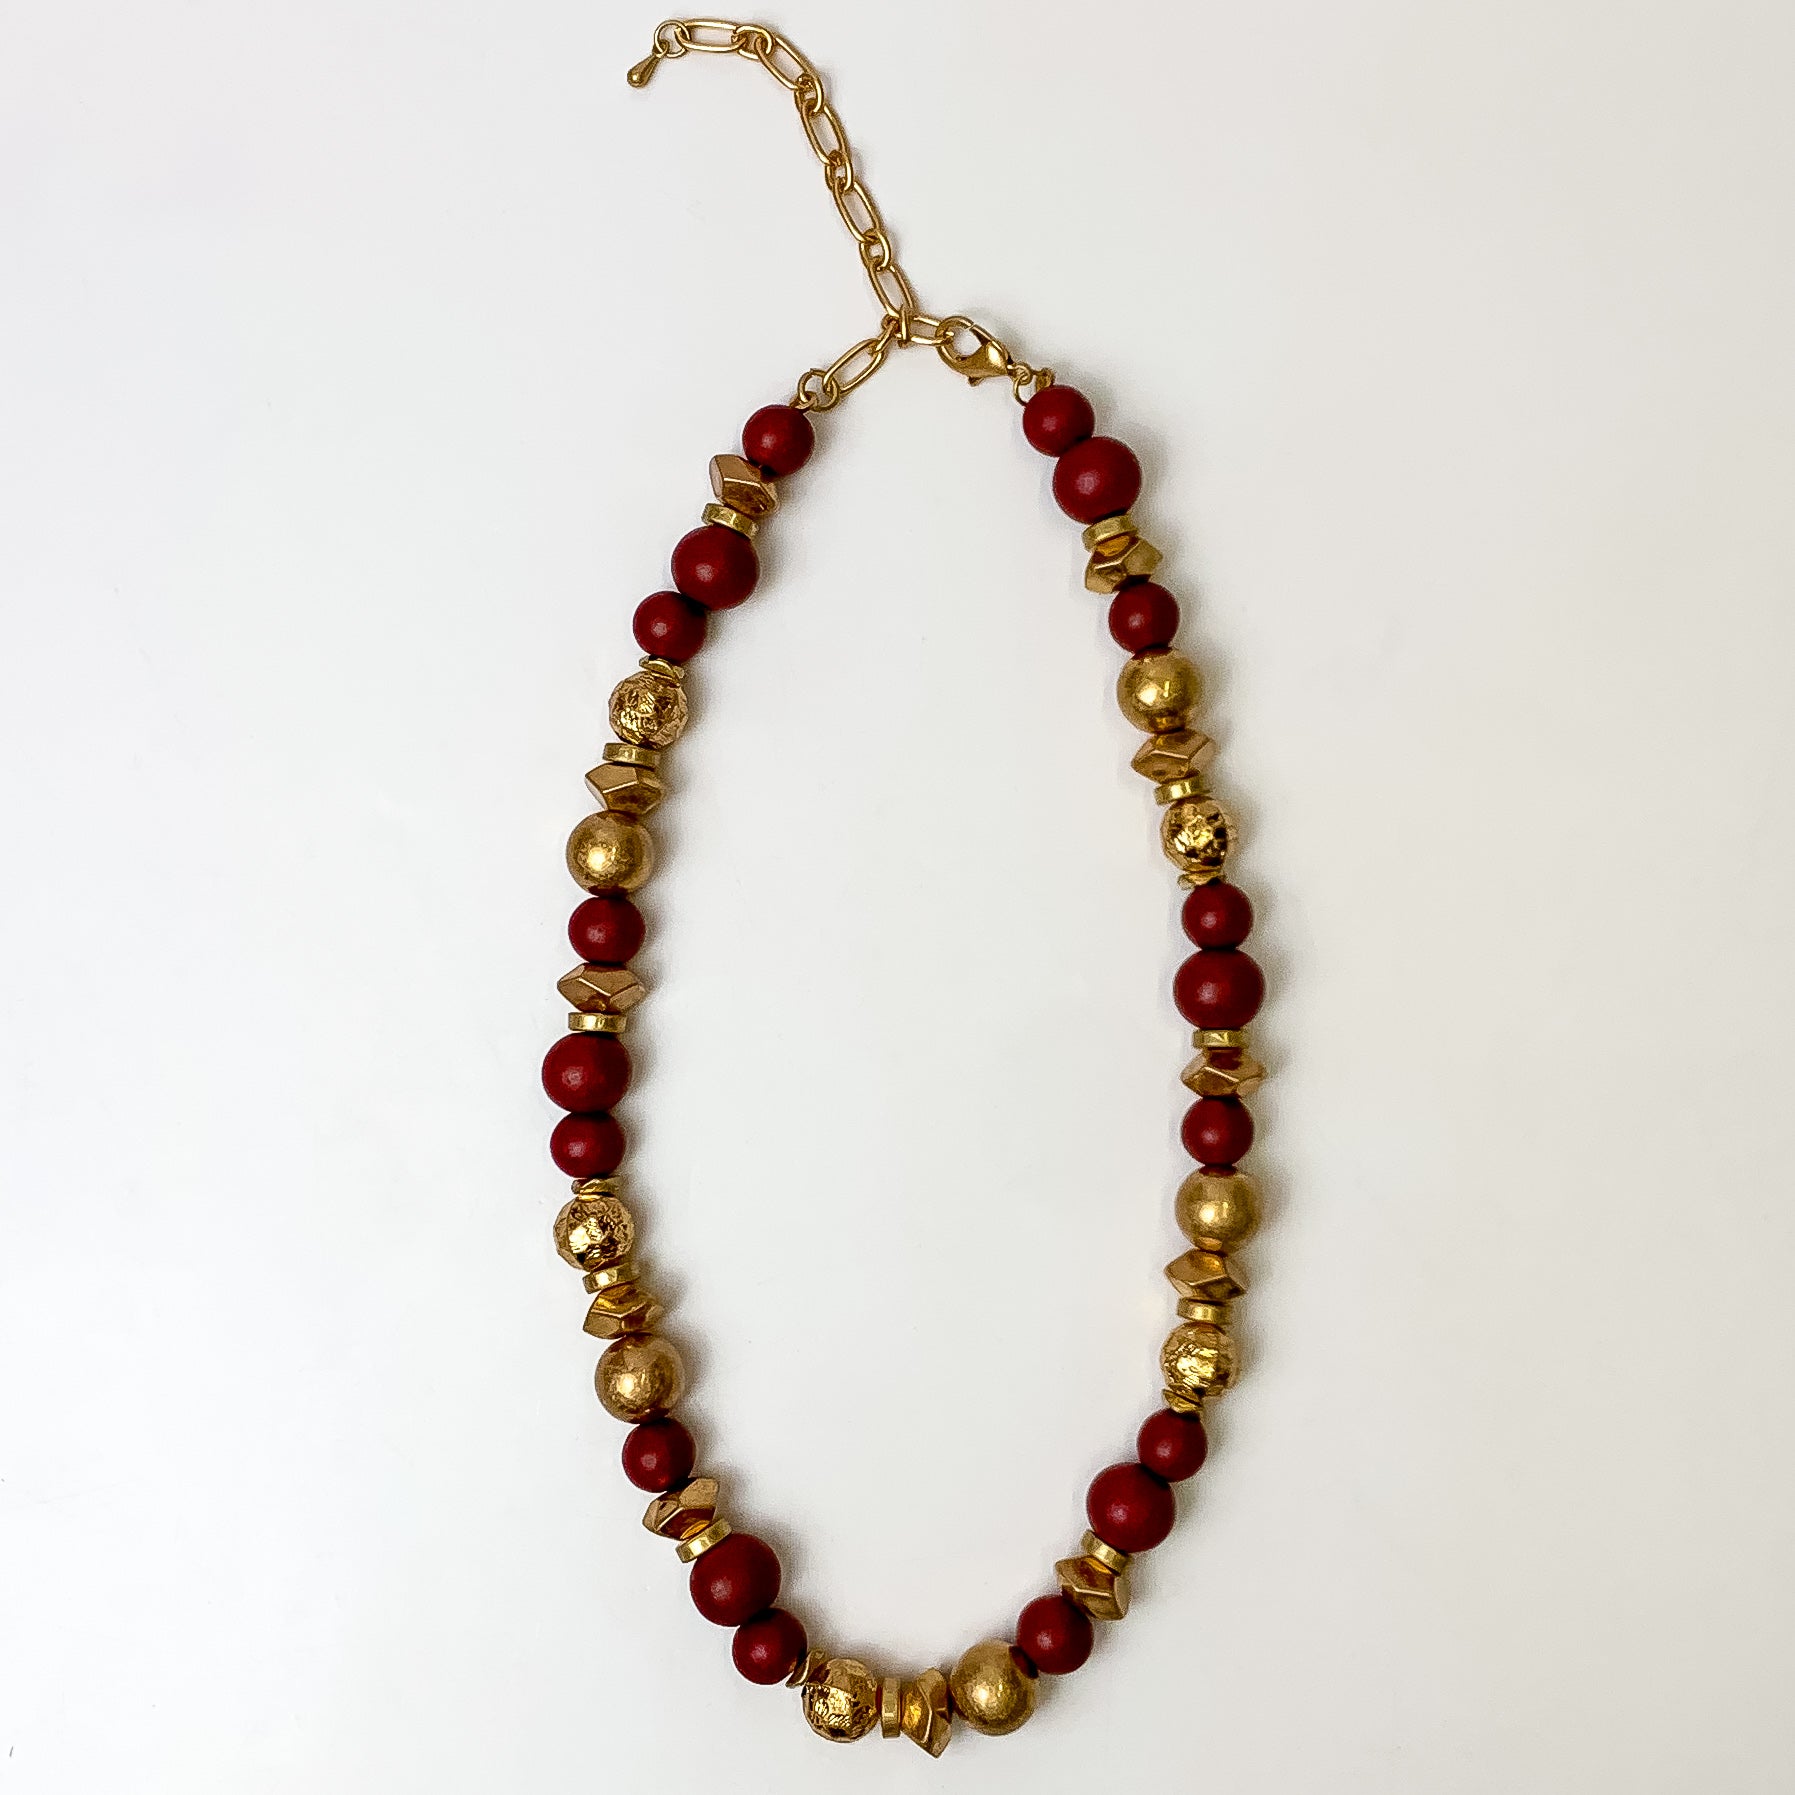 This texture beaded necklace with gold tone and maroon beads are placed on a white background.